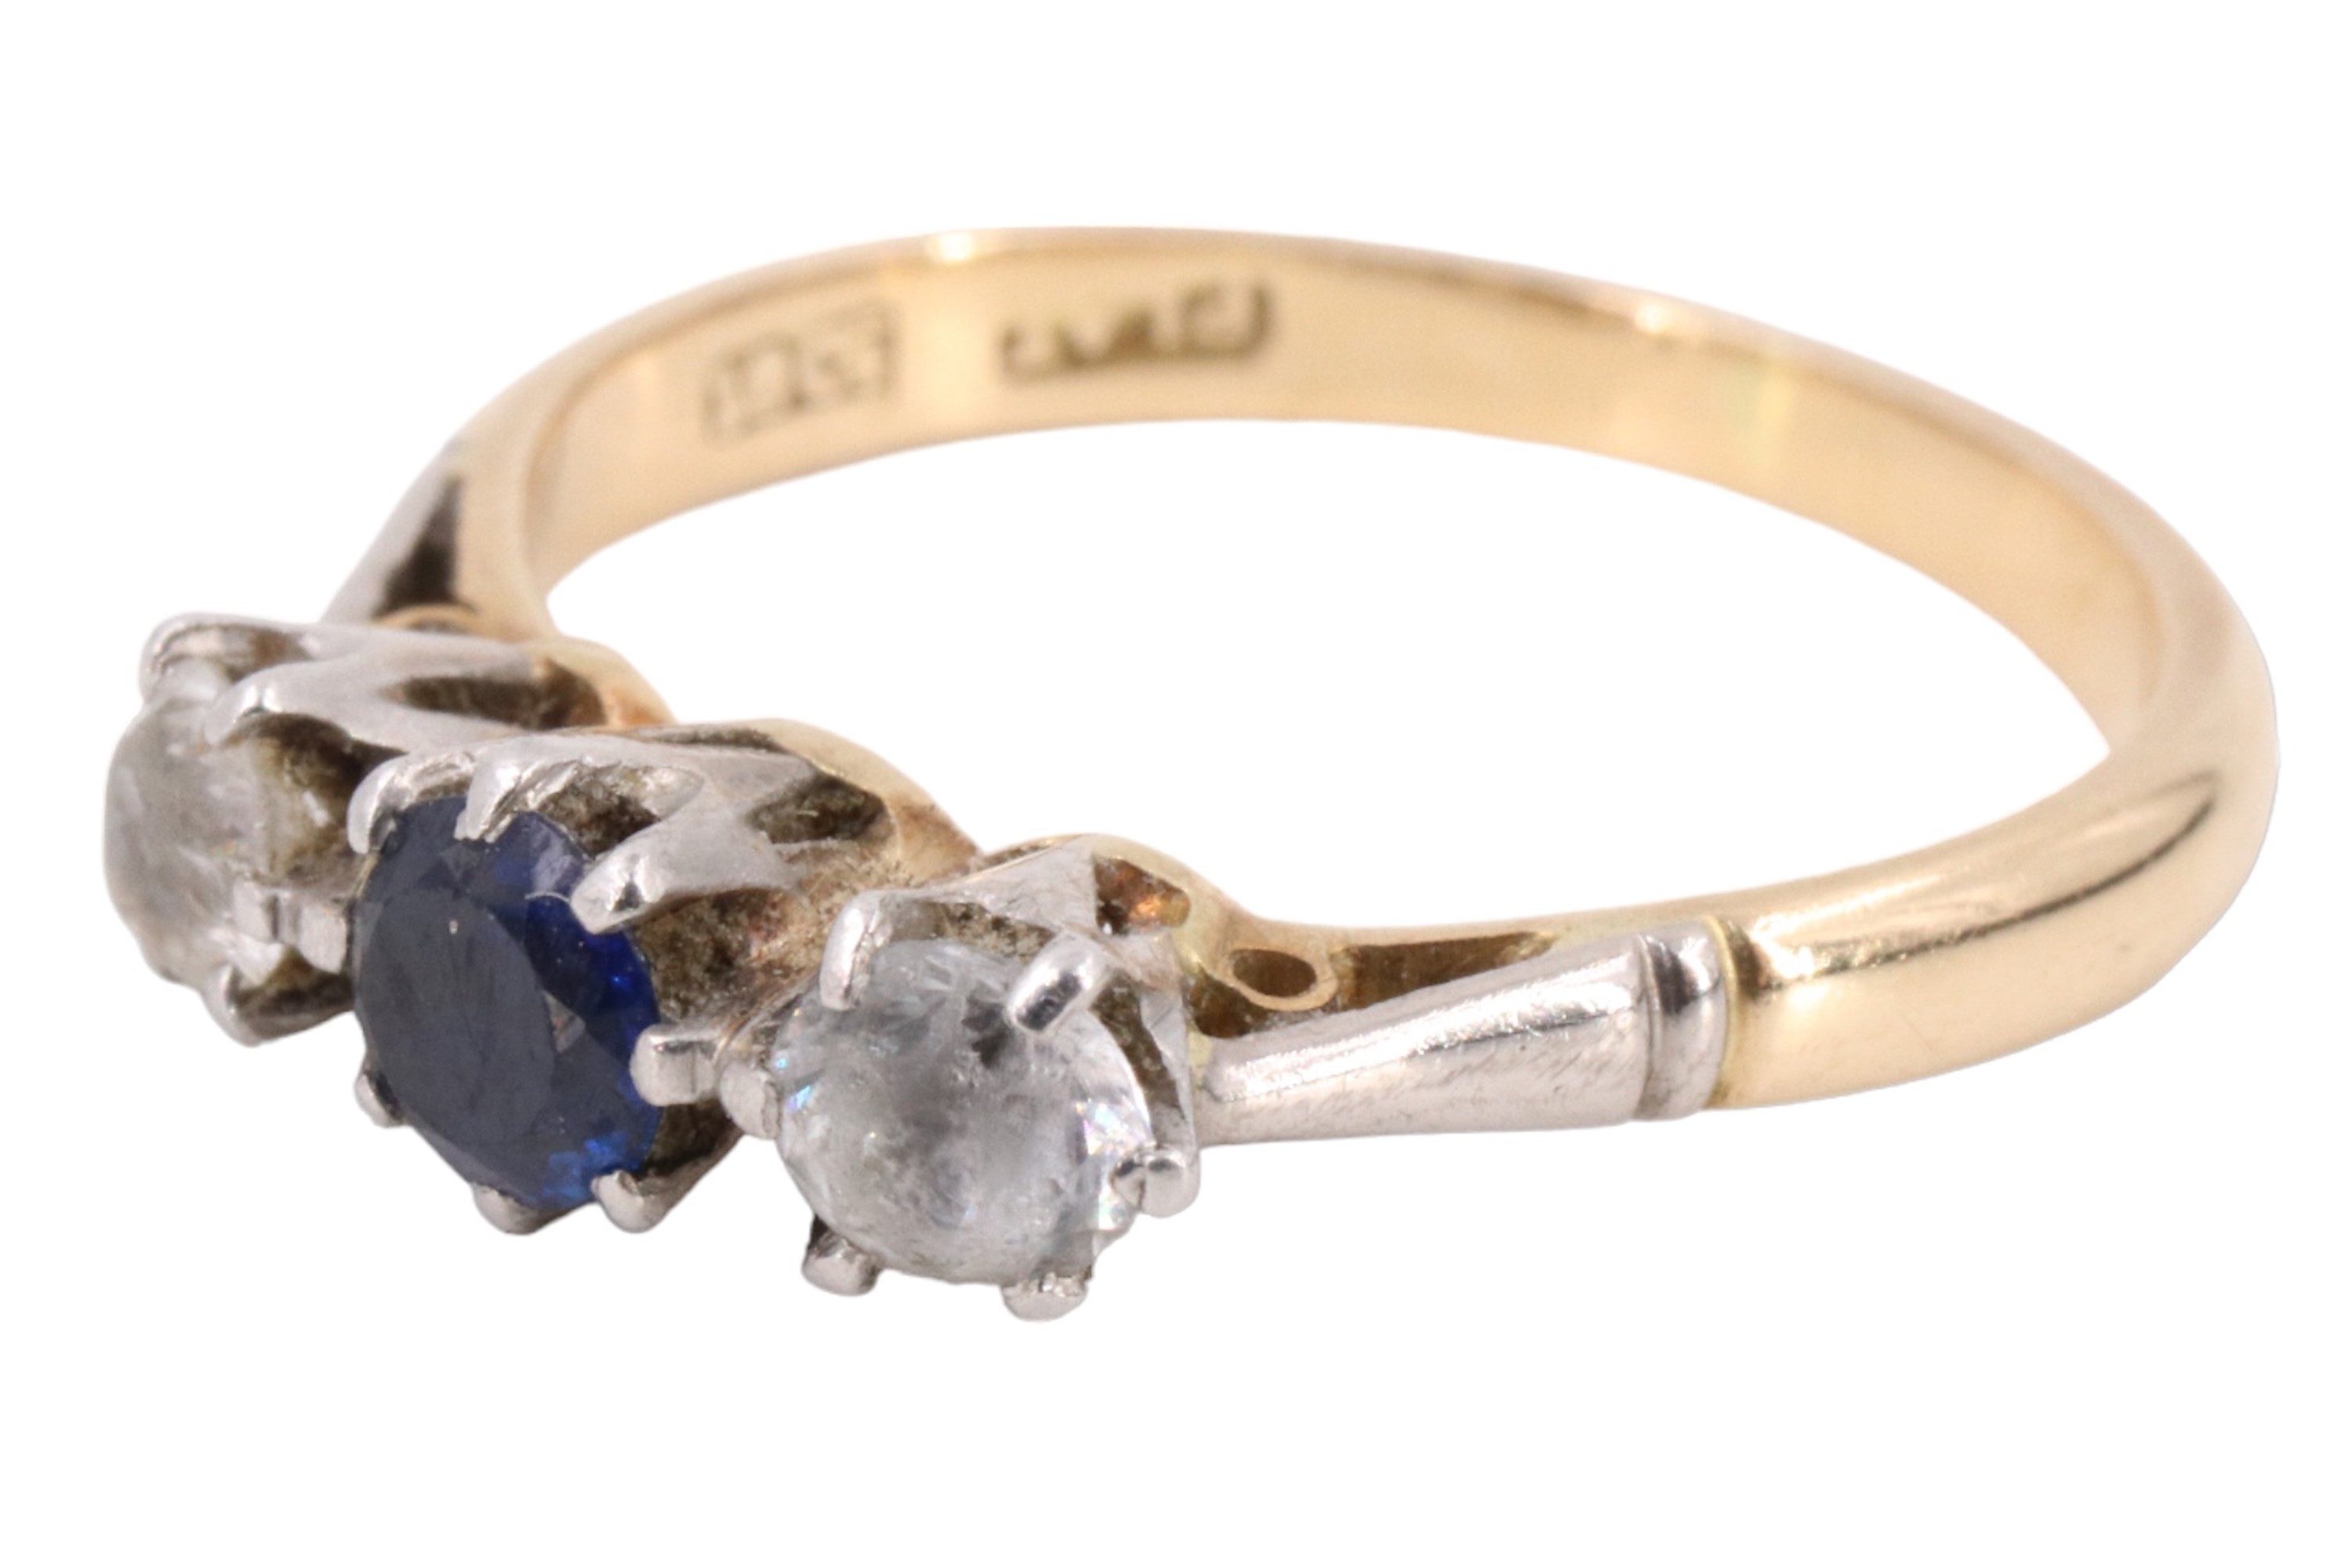 A sapphire and spinel three stone finger ring, having a 4 mm blue sapphire between two white